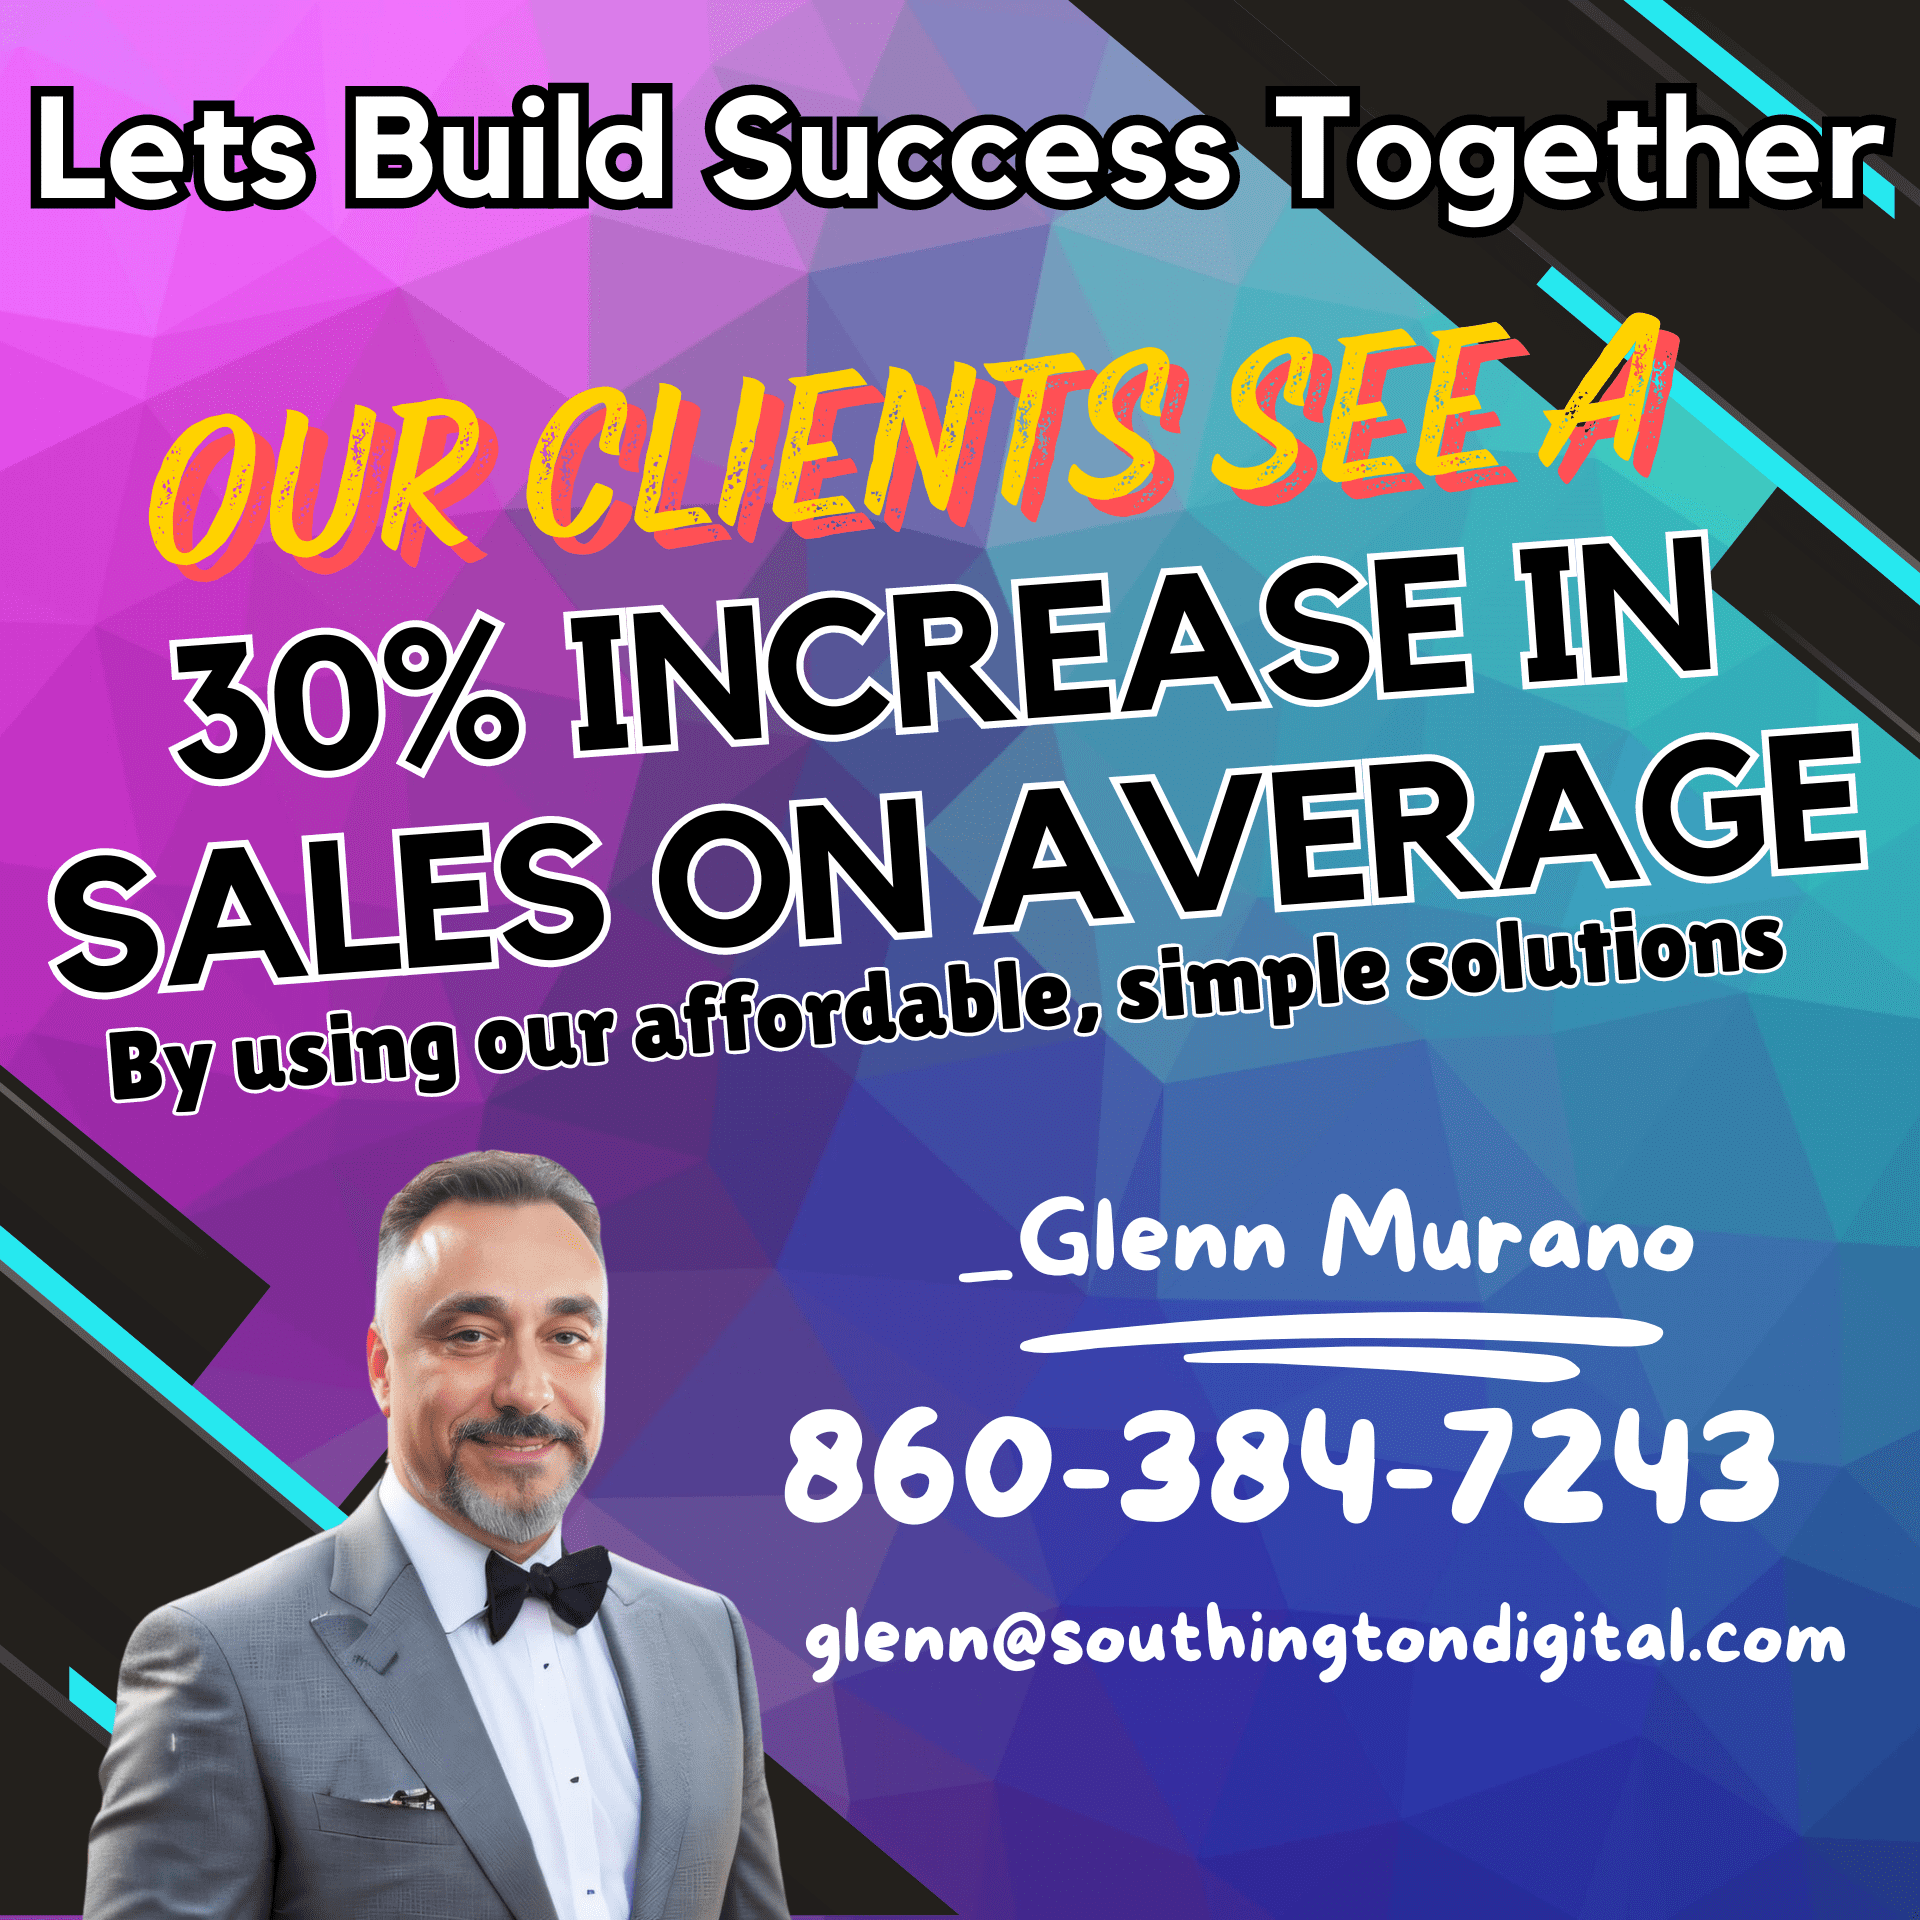 Promotional graphic for Southington Digital Solutions featuring Glenn Murano. The text reads 'Let's Build Success Together. Our clients see a 30% increase in sales on average by using our affordable, simple solutions.' Contact information: Glenn Murano, 860-384-7243, glenn@southingtondigital.com. The background is a colorful geometric pattern with a photo of Glenn Murano in a suit.